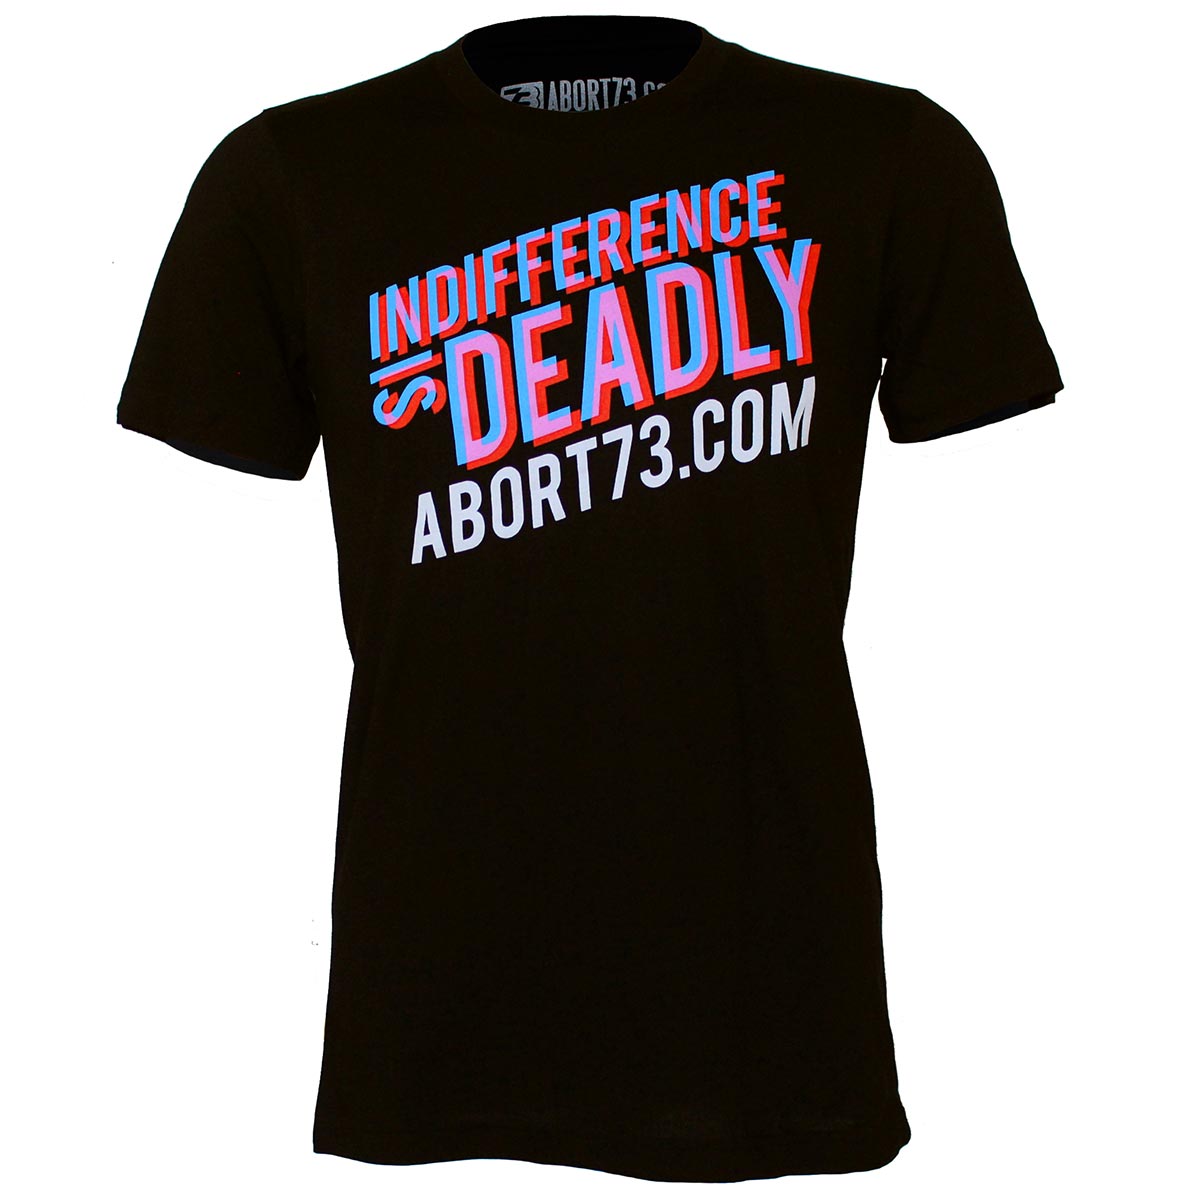 Indifference is Deadly (Abort73 Unisex T-shirt)